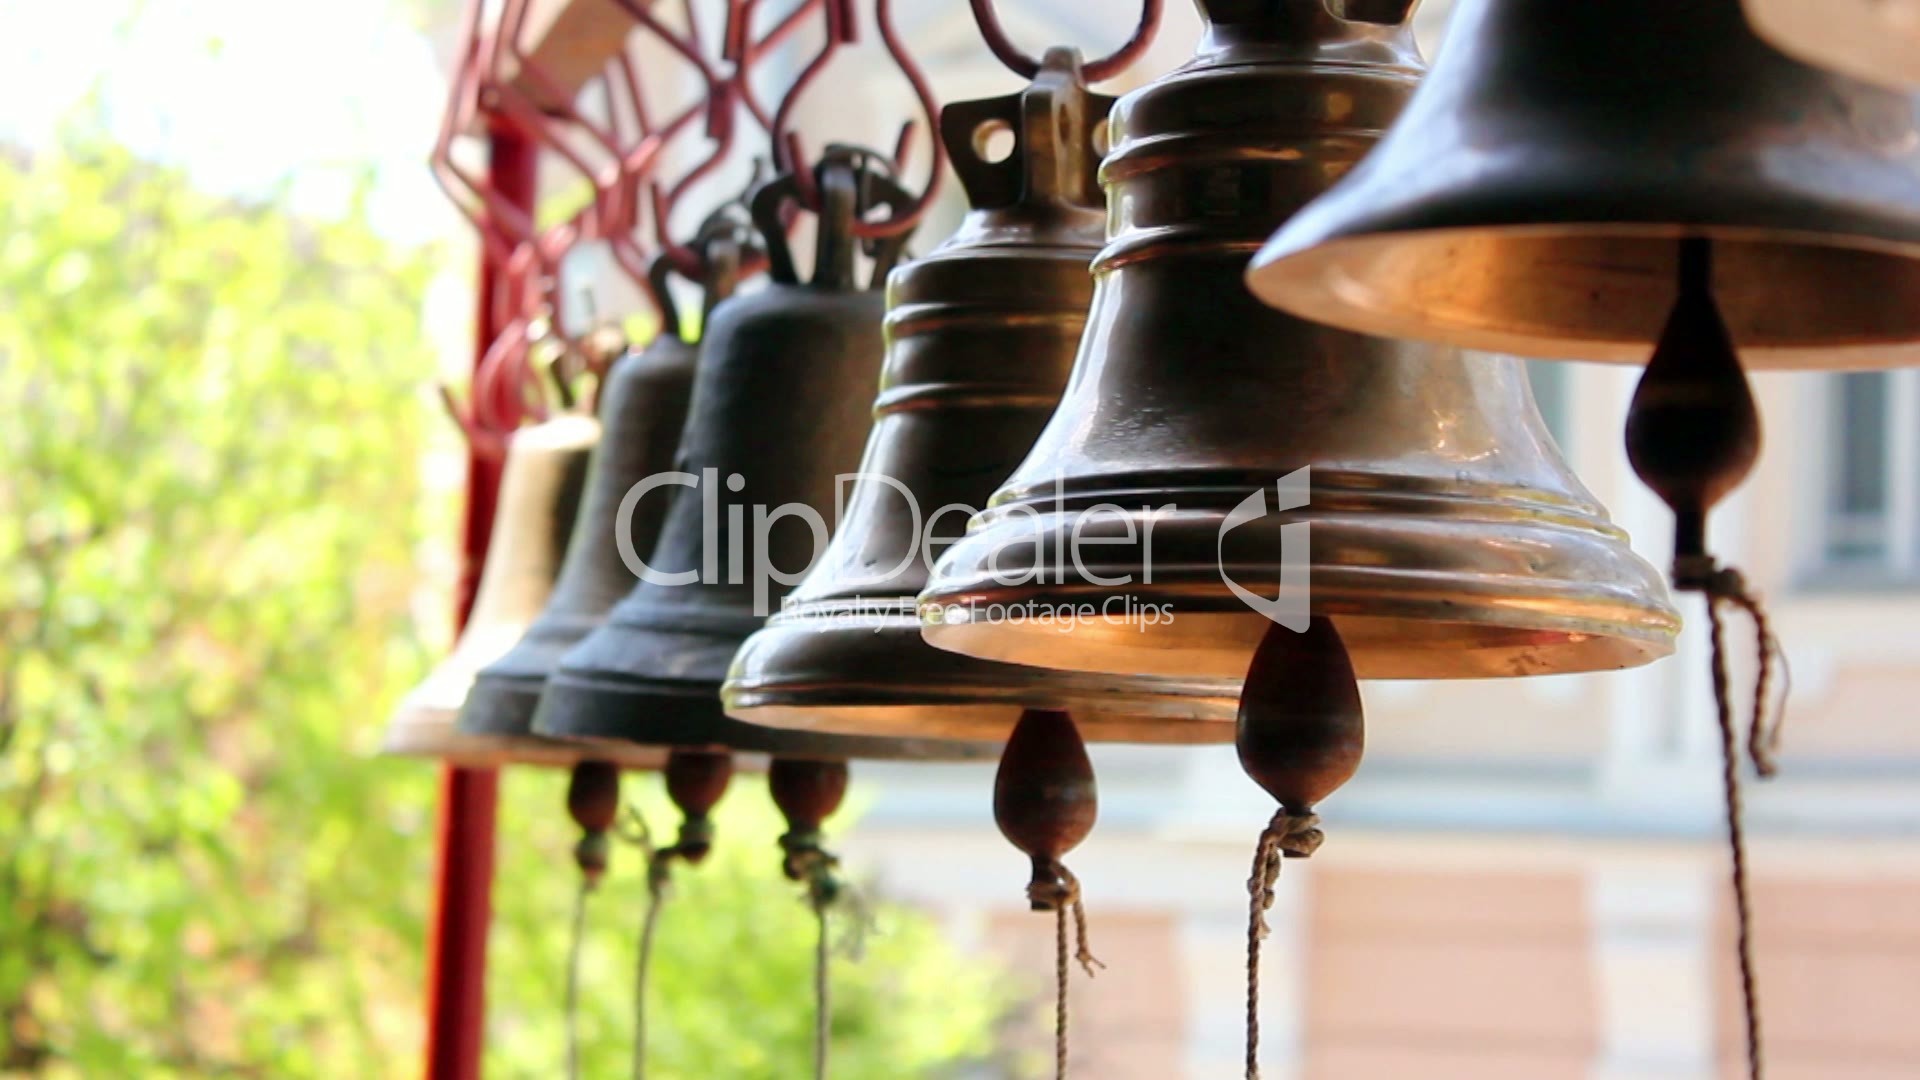 Church bells: Royalty-free video and stock footage